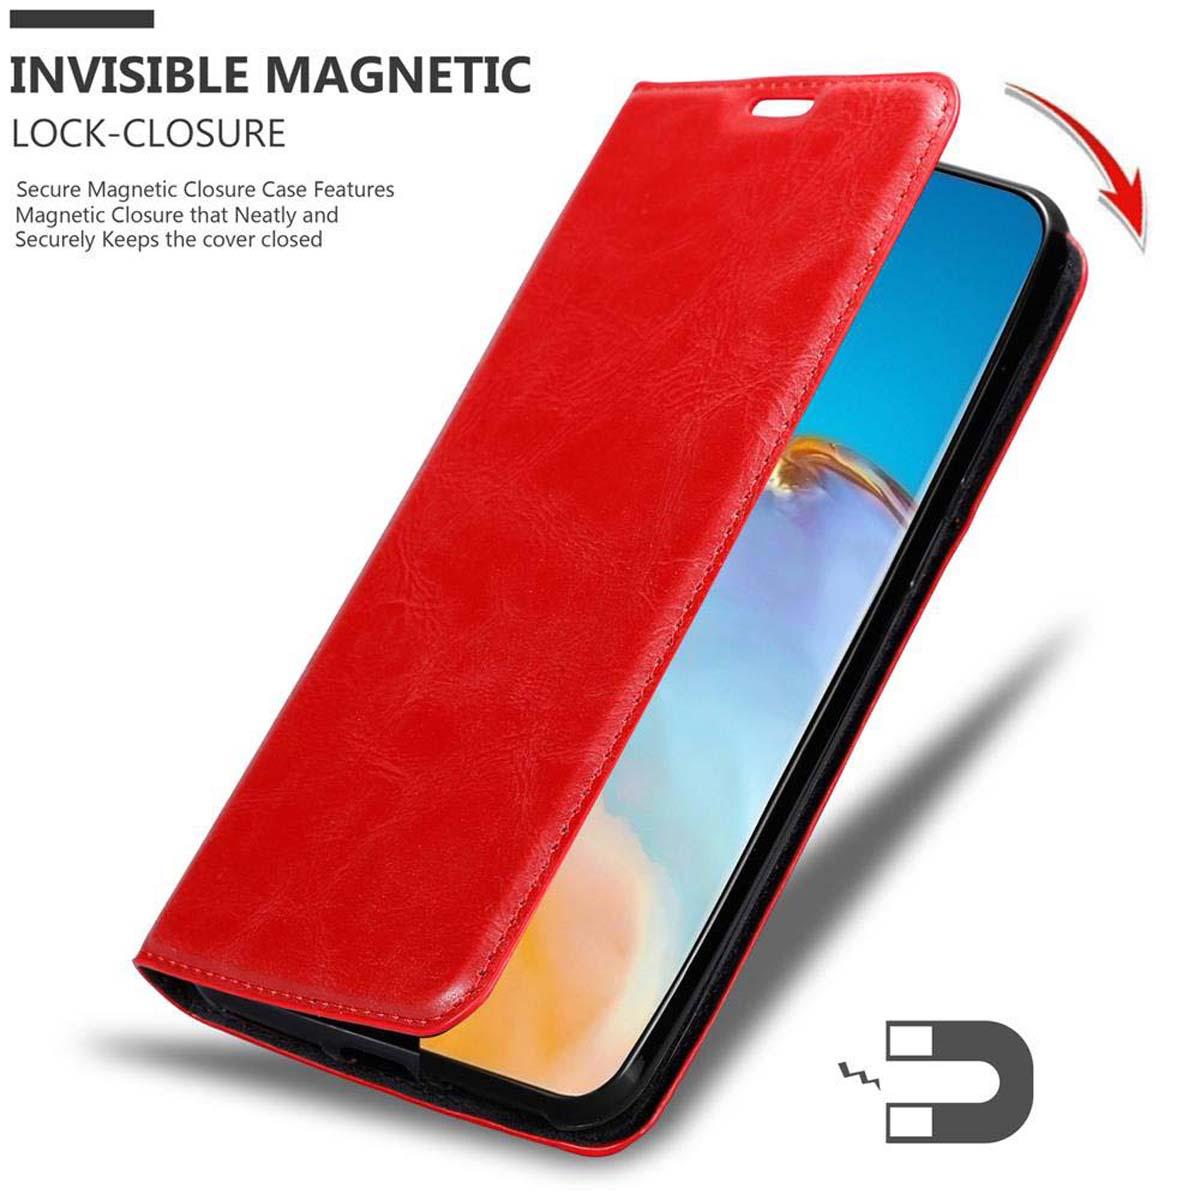 Bookcover, Magnet, PRO+, PRO P40 Invisible Huawei, APFEL Hülle / ROT CADORABO Book P40